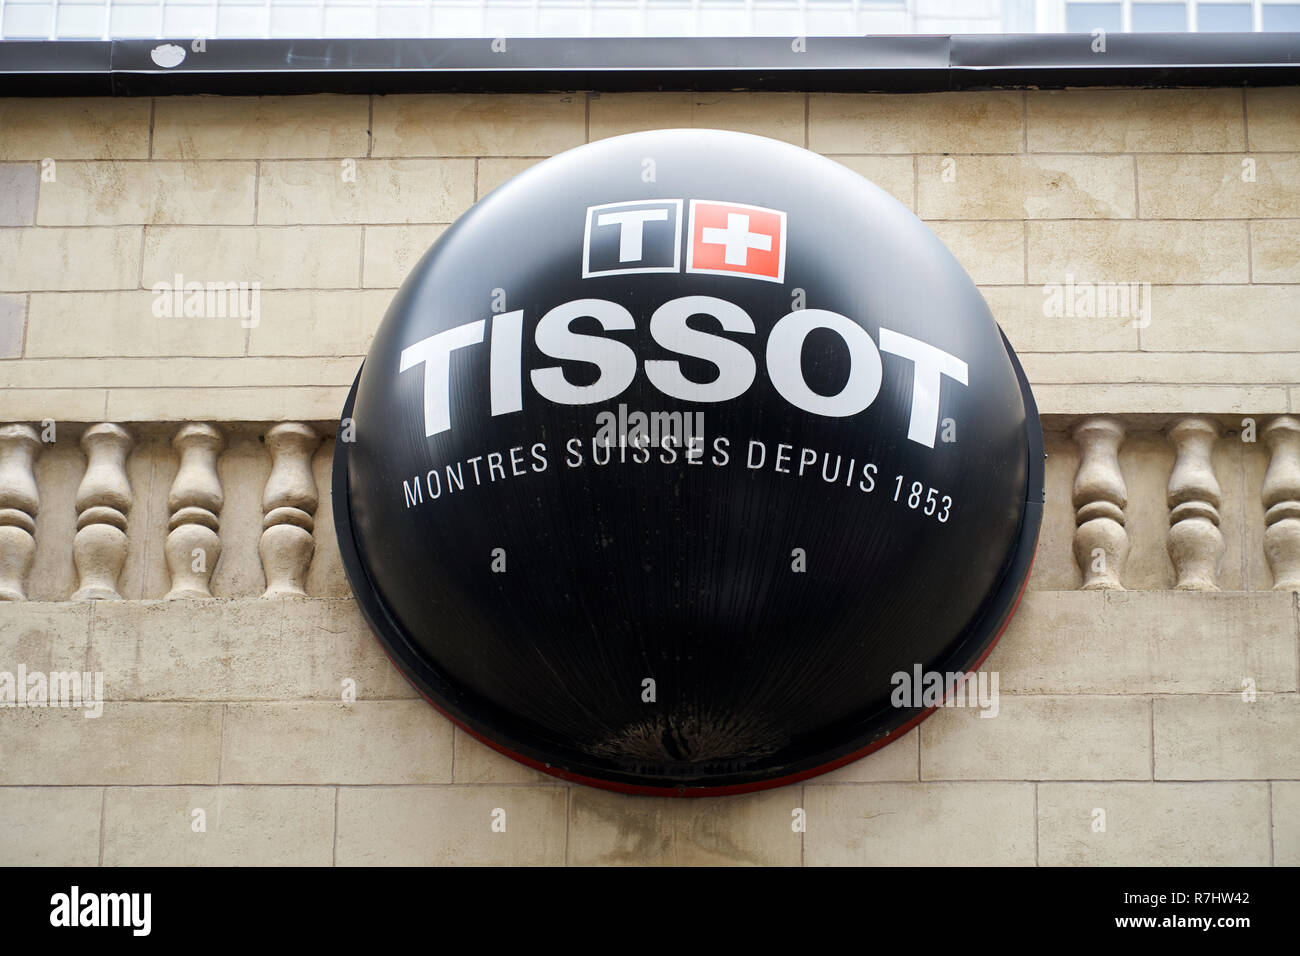 MONTREAL, CANADA - OCTOBER 4, 2018: Tissot logo and sign on a building. Tissot is a popular and famous Swiss luxury watchmaker. Stock Photo